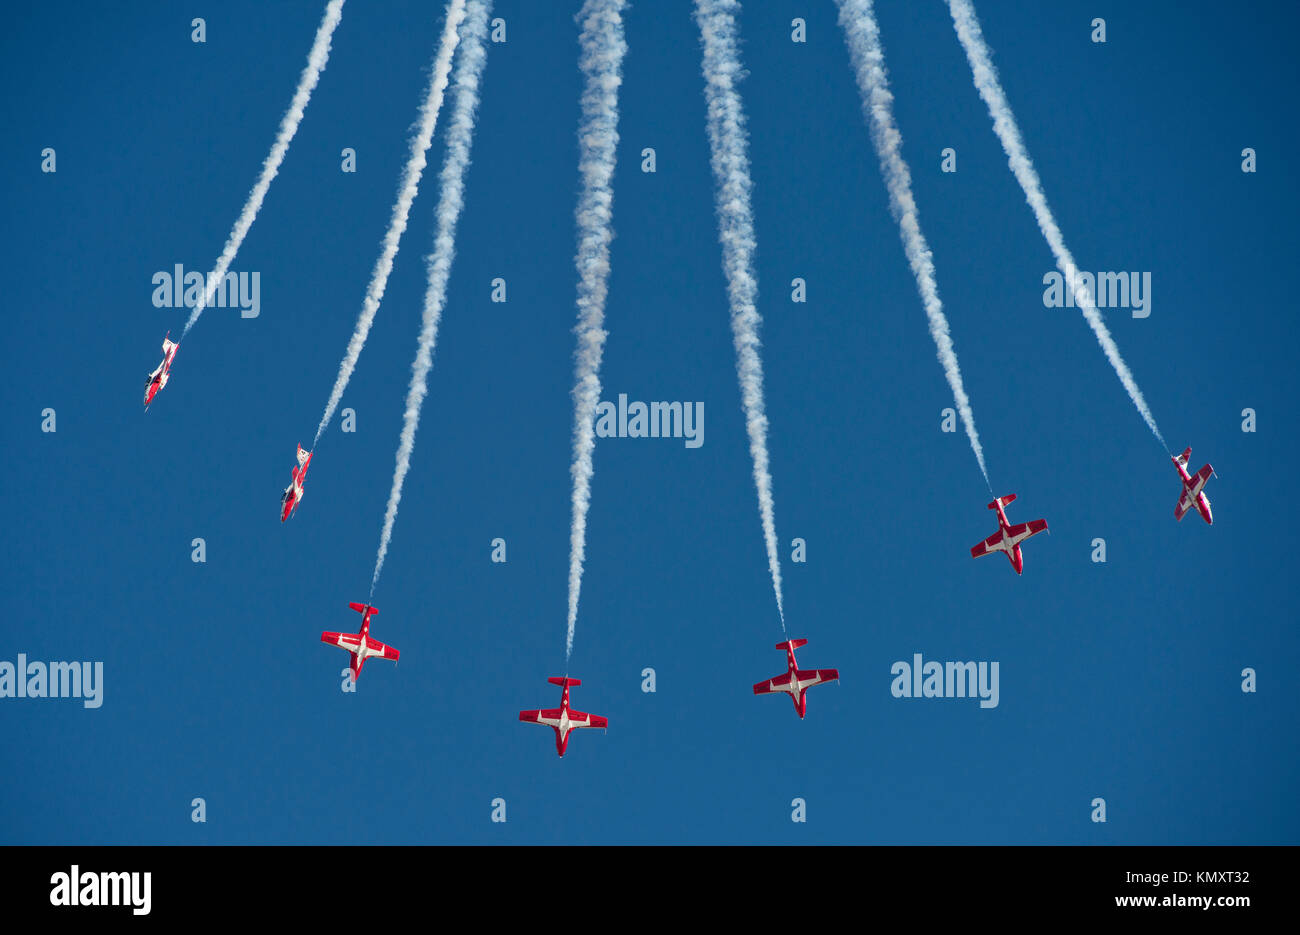 Royal Canadian Snowbirds performing a 'downward bomb burst' at the Gowen Thunder 2017 Airshow at Gowen Field in Boise Idaho on October 14 2017 Stock Photo